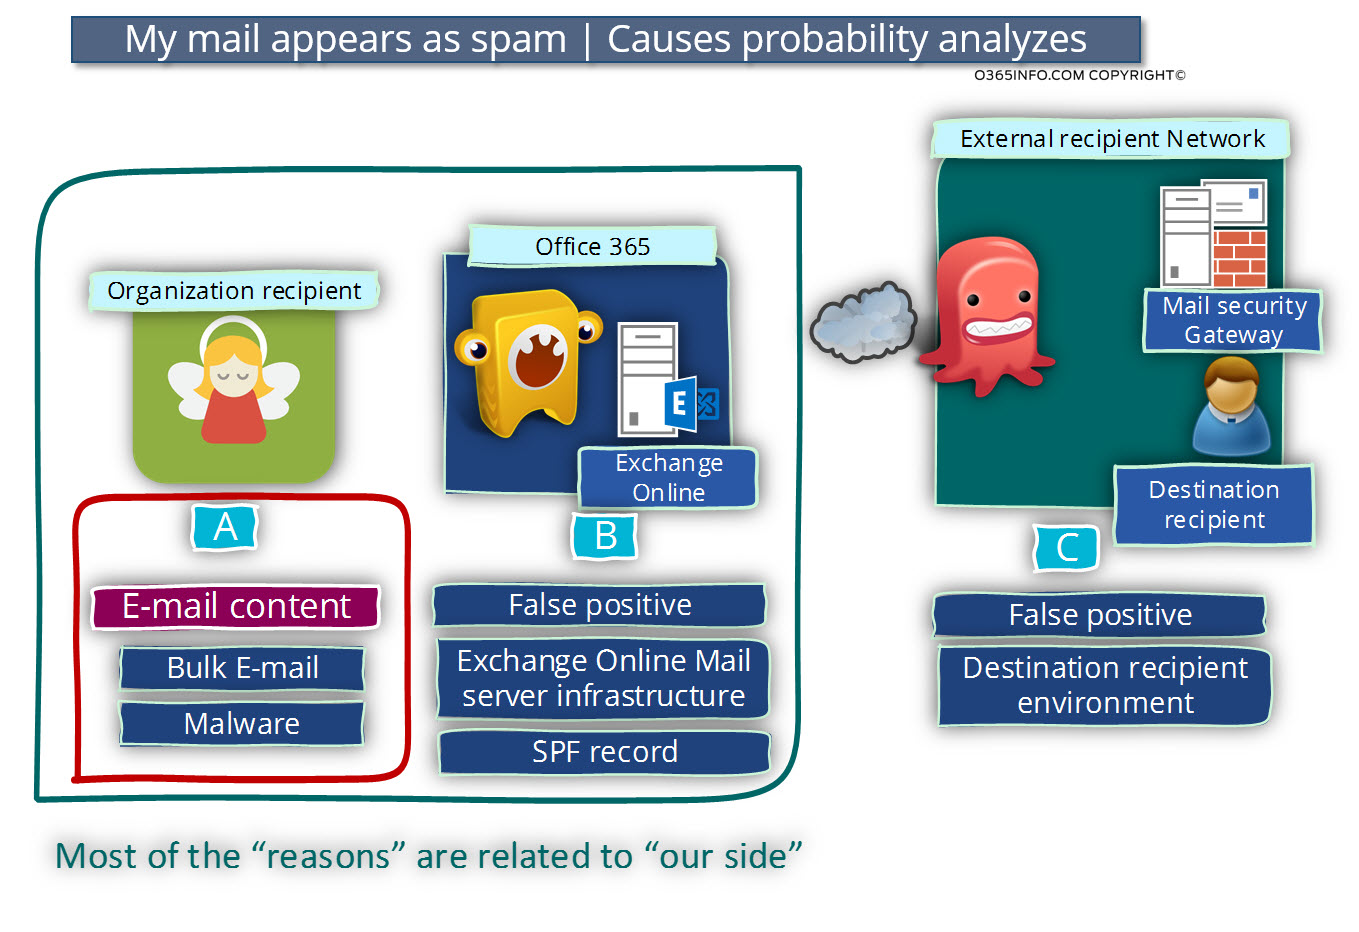 My mail appears as spam - Causes probability analyzes